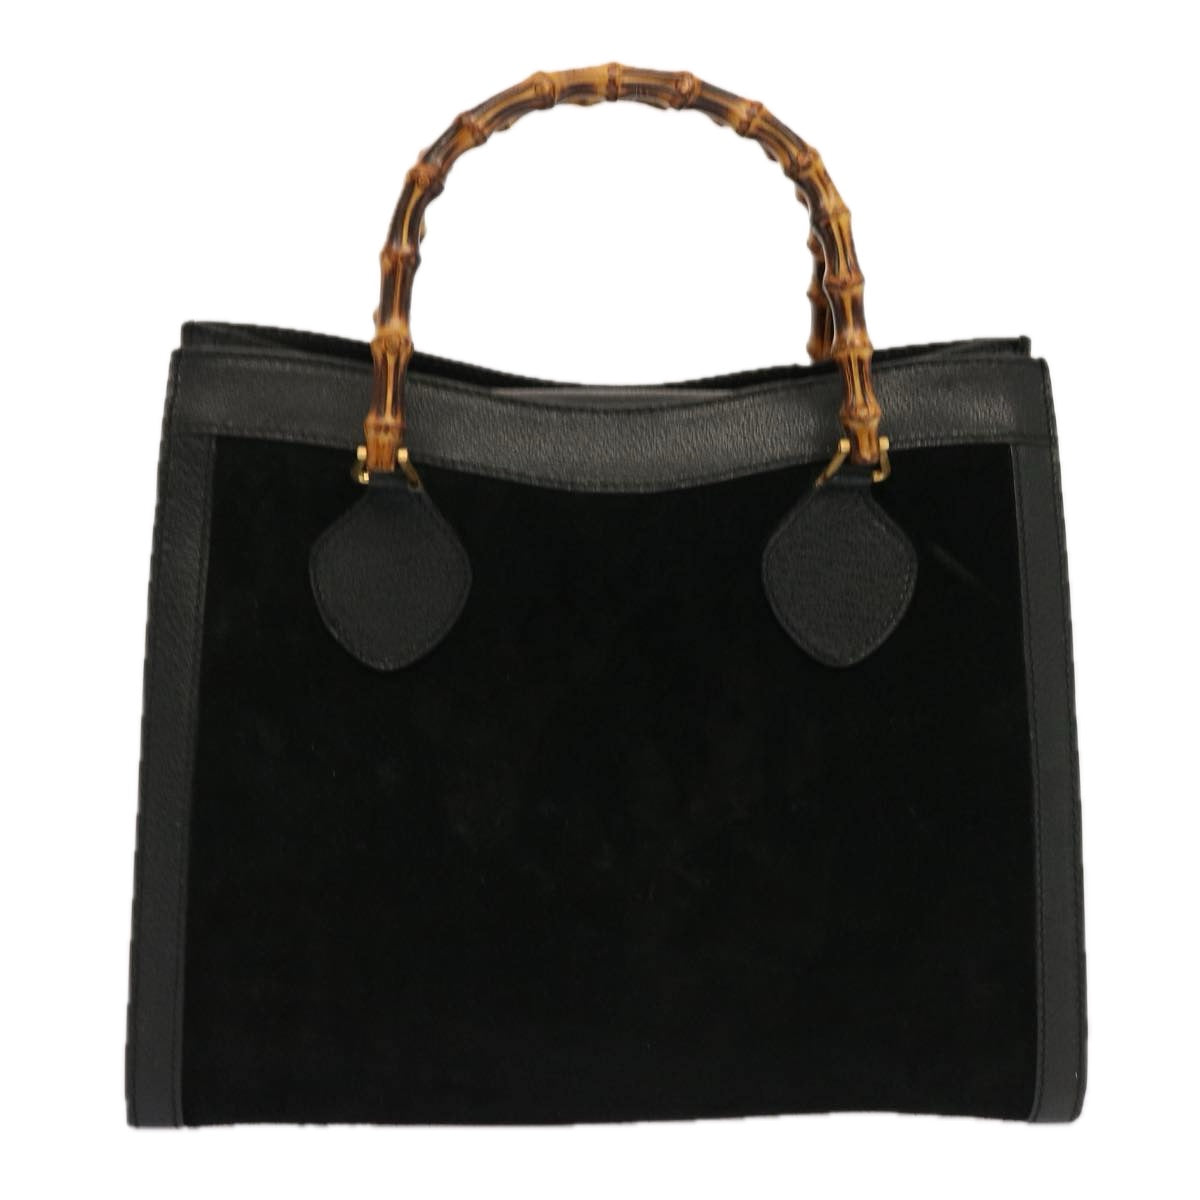 GUCCI Bamboo Tote Bag Suede Black 002 123 0260 Auth ep3848